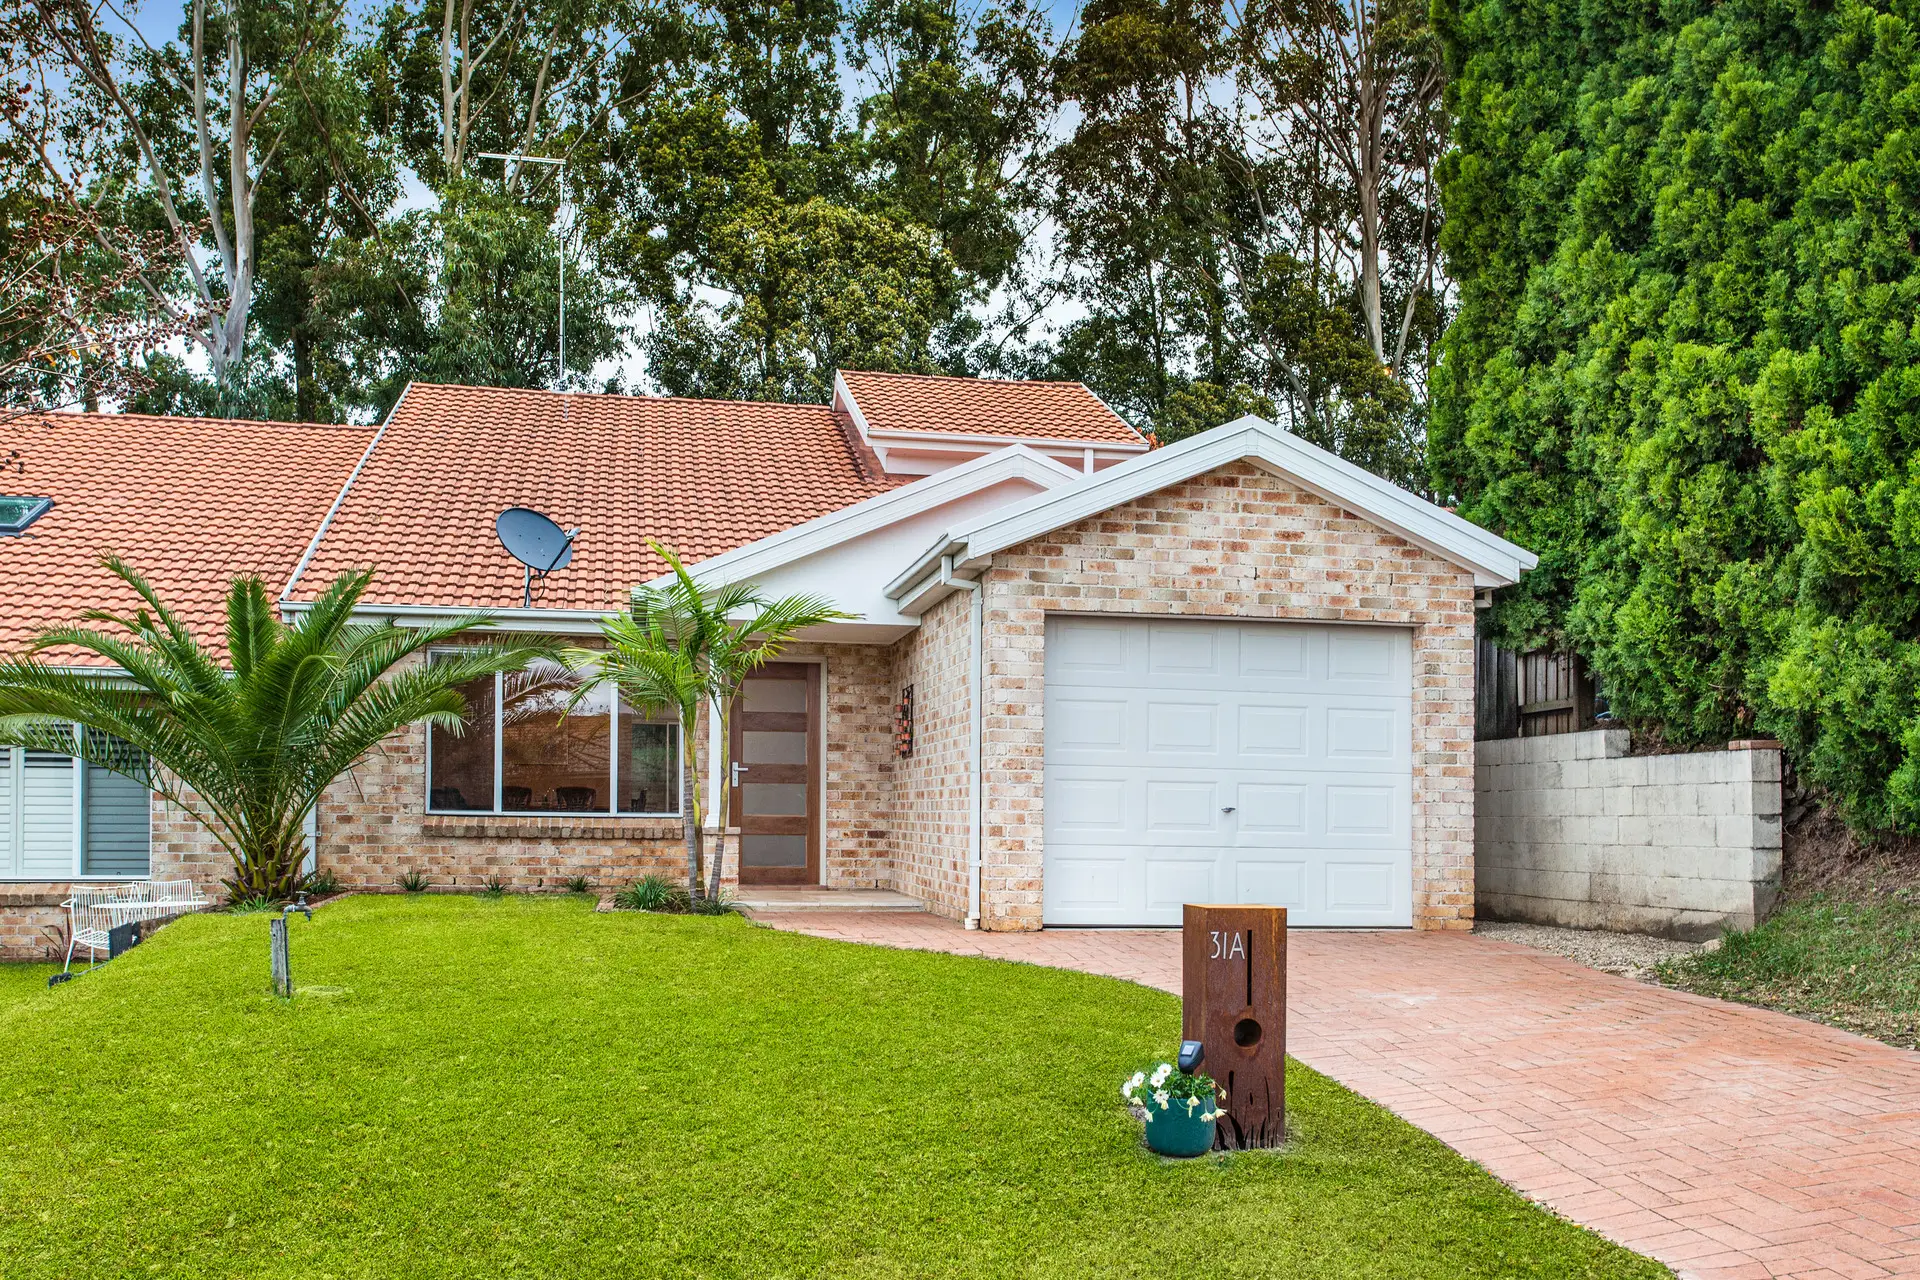 Photo #1: 31A Mariam Place, Cherrybrook - Sold by Louis Carr Real Estate